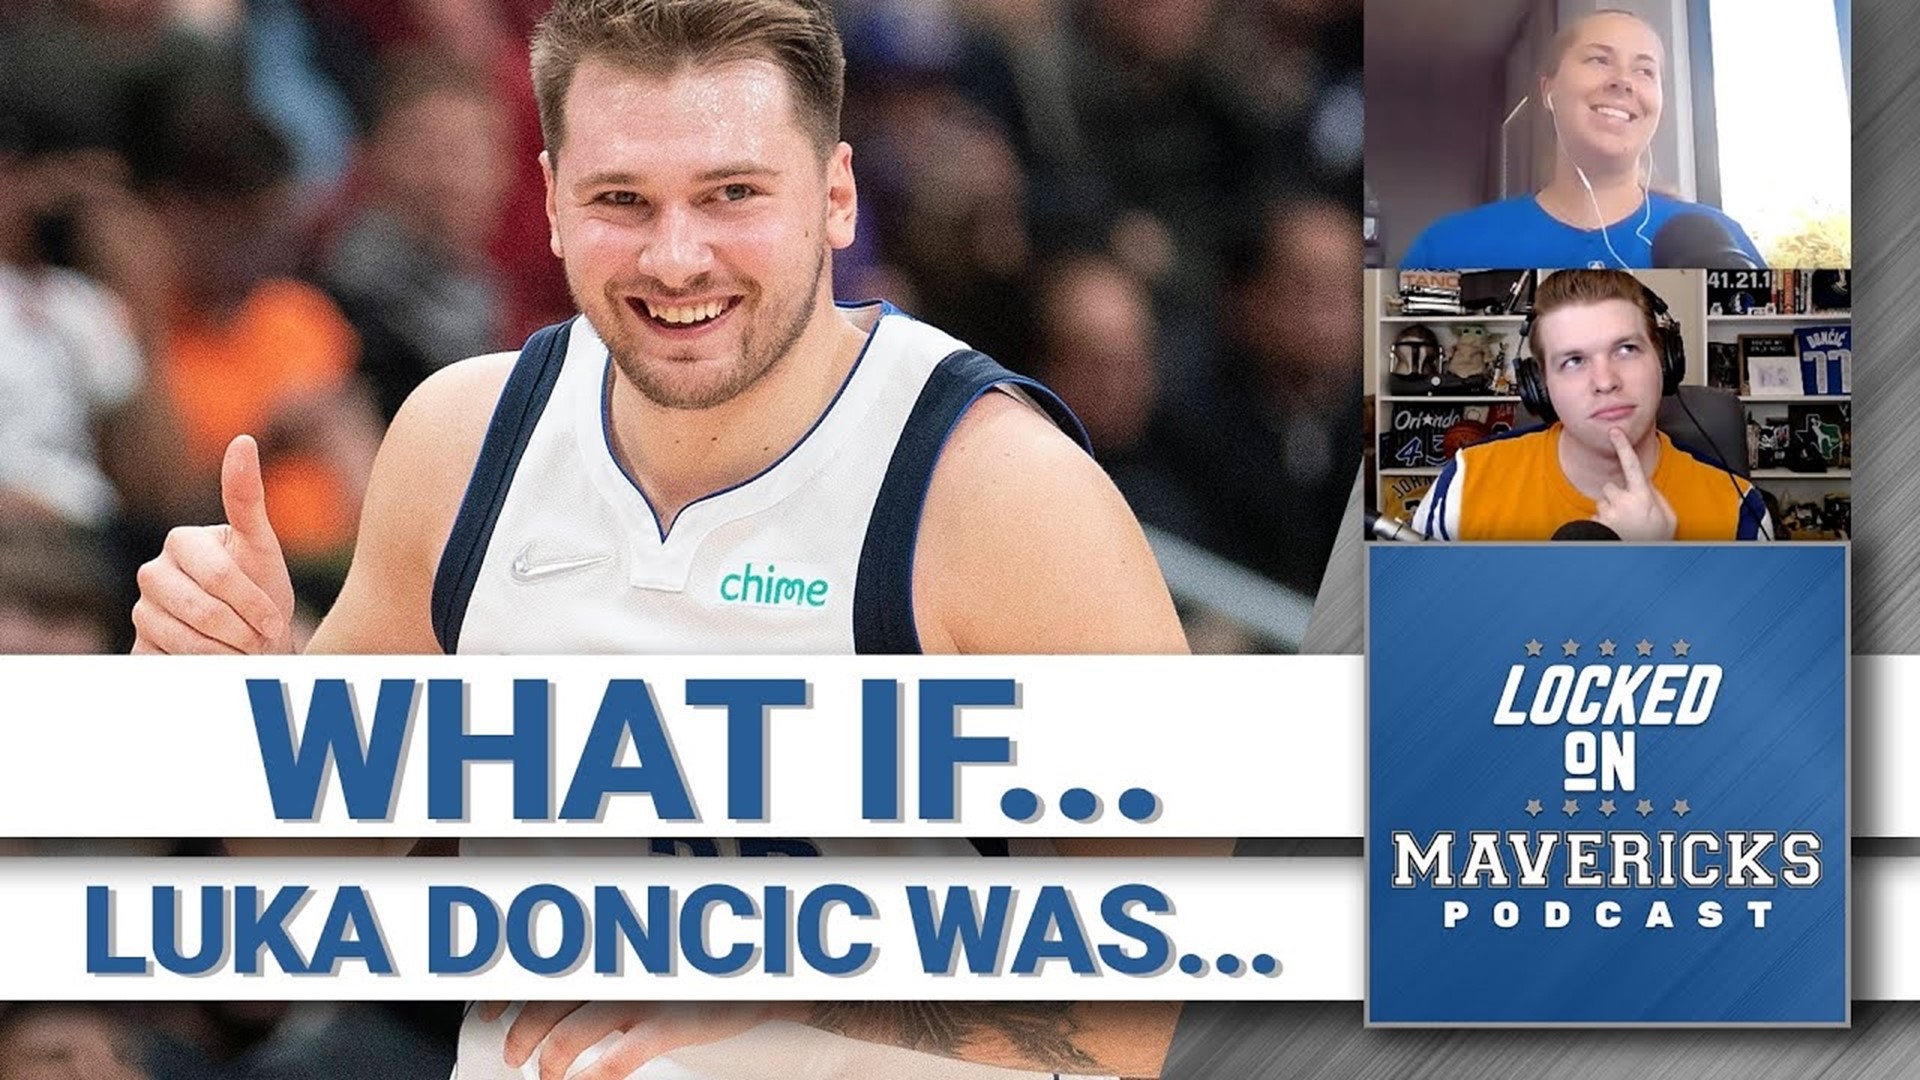 Nick Angstadt is joined by Lauren Gunn to discuss Luka Doncic and what his season could be like if he entered the season in 'the best shape of his life.'